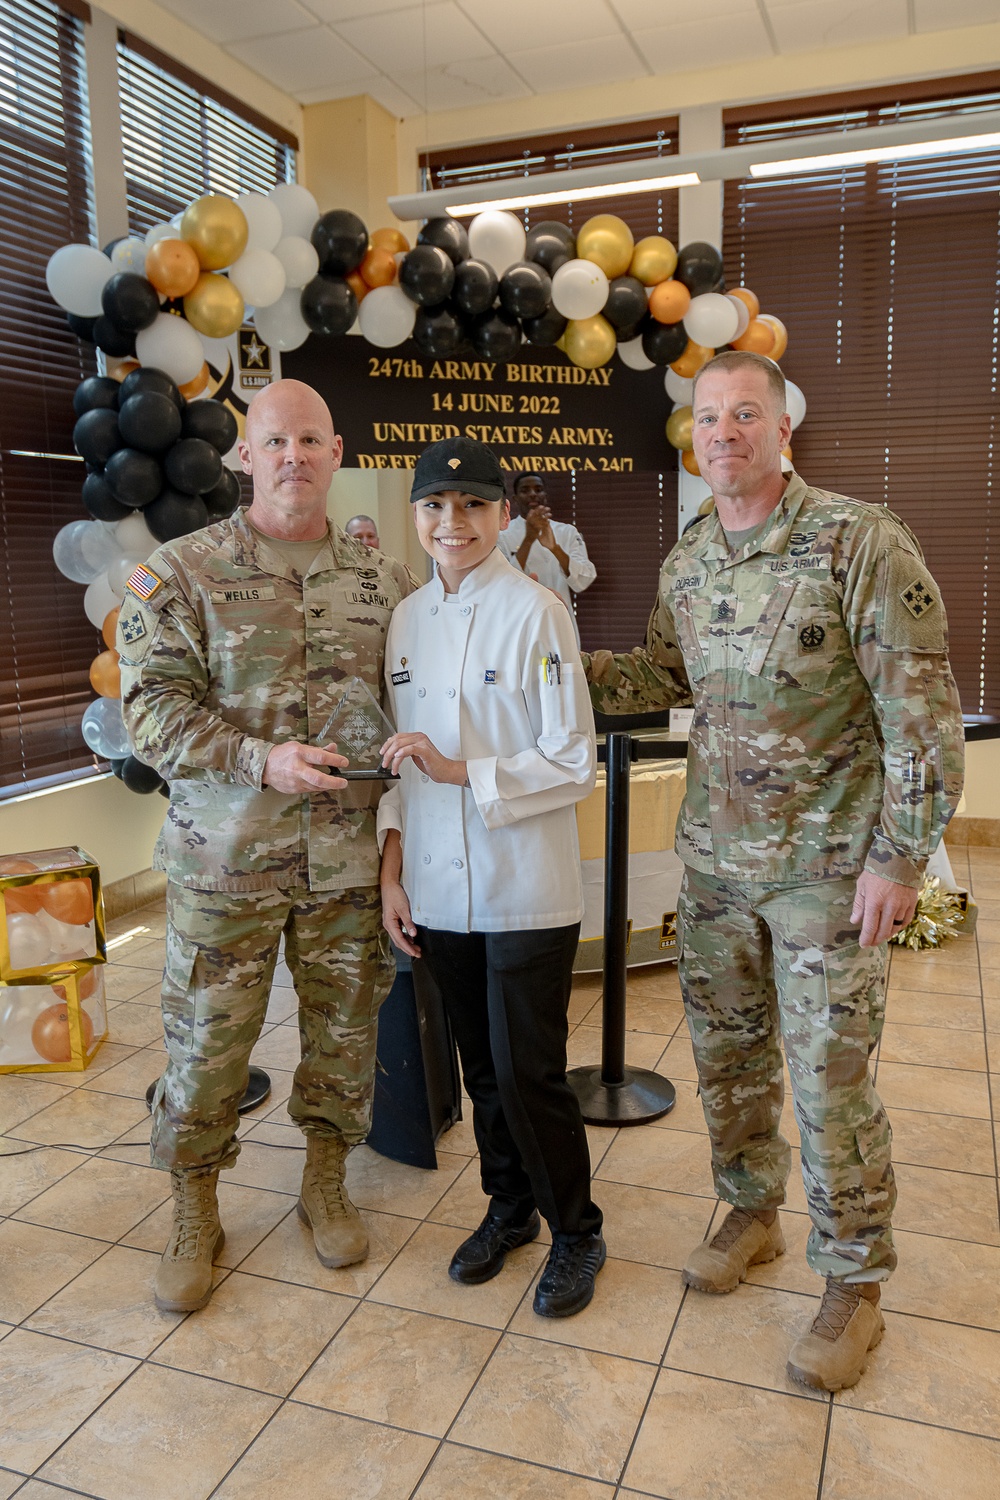 Army 247th Birthday Cake Decorating Competition